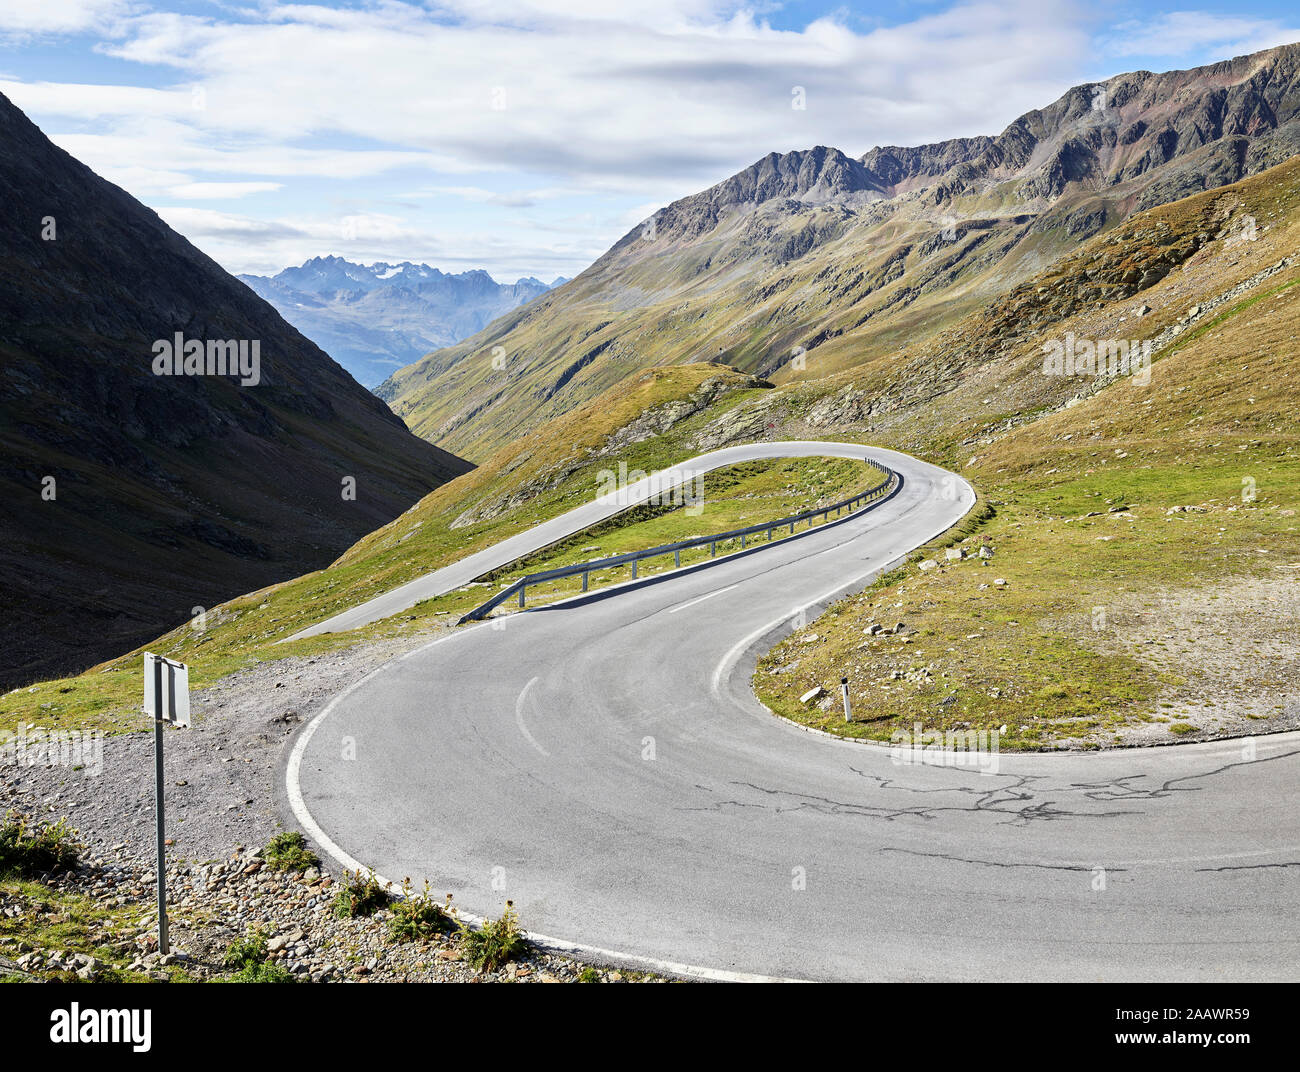 Winding road on mountain against cloudy sky during sunny day, Tyrol State, Austria Stock Photo